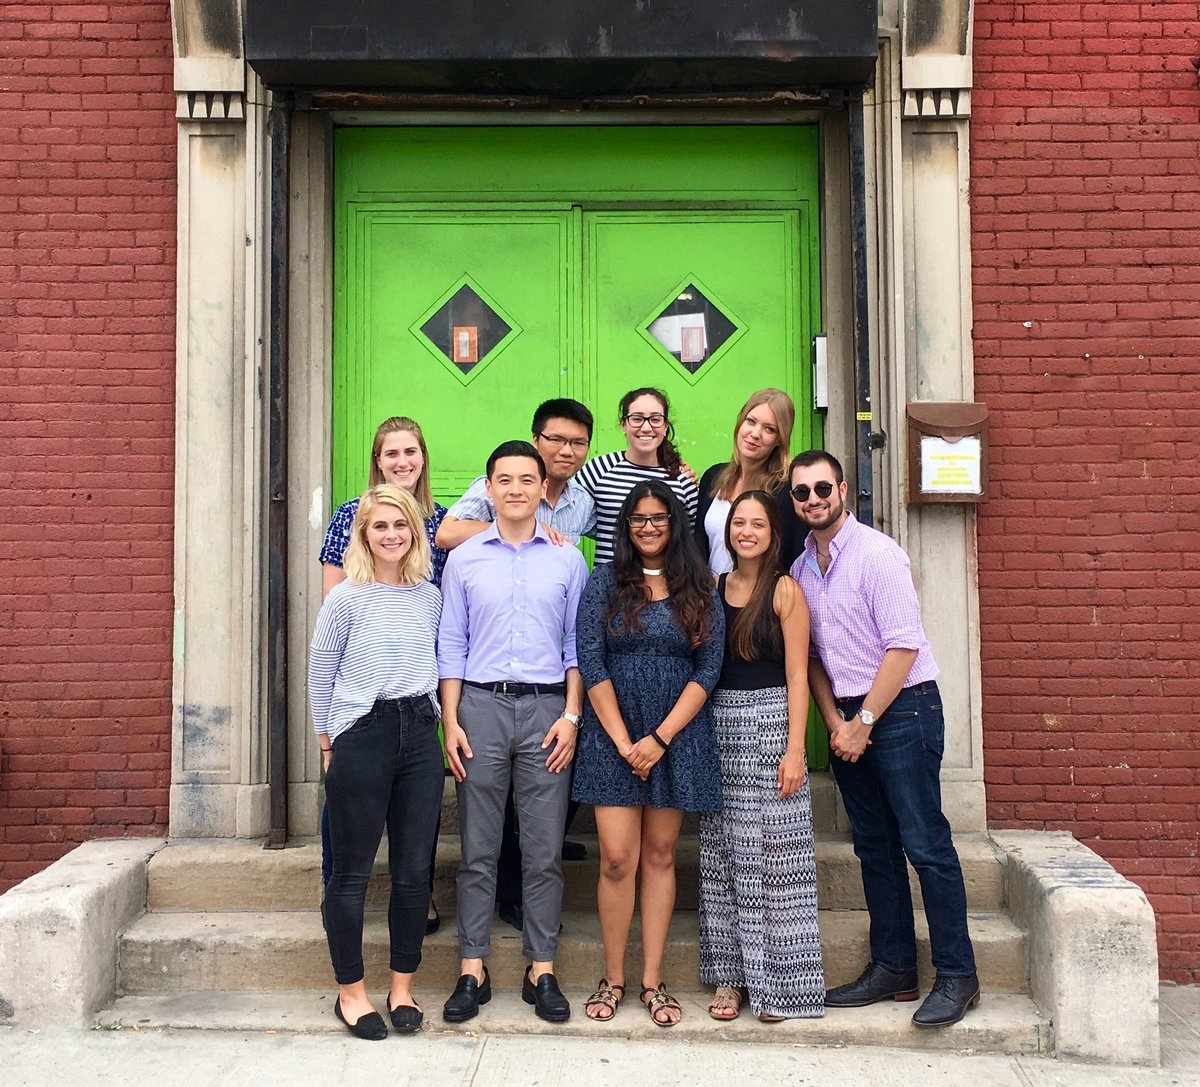 Happy #4th from our hardworking #summer #interns & the rest of the team!